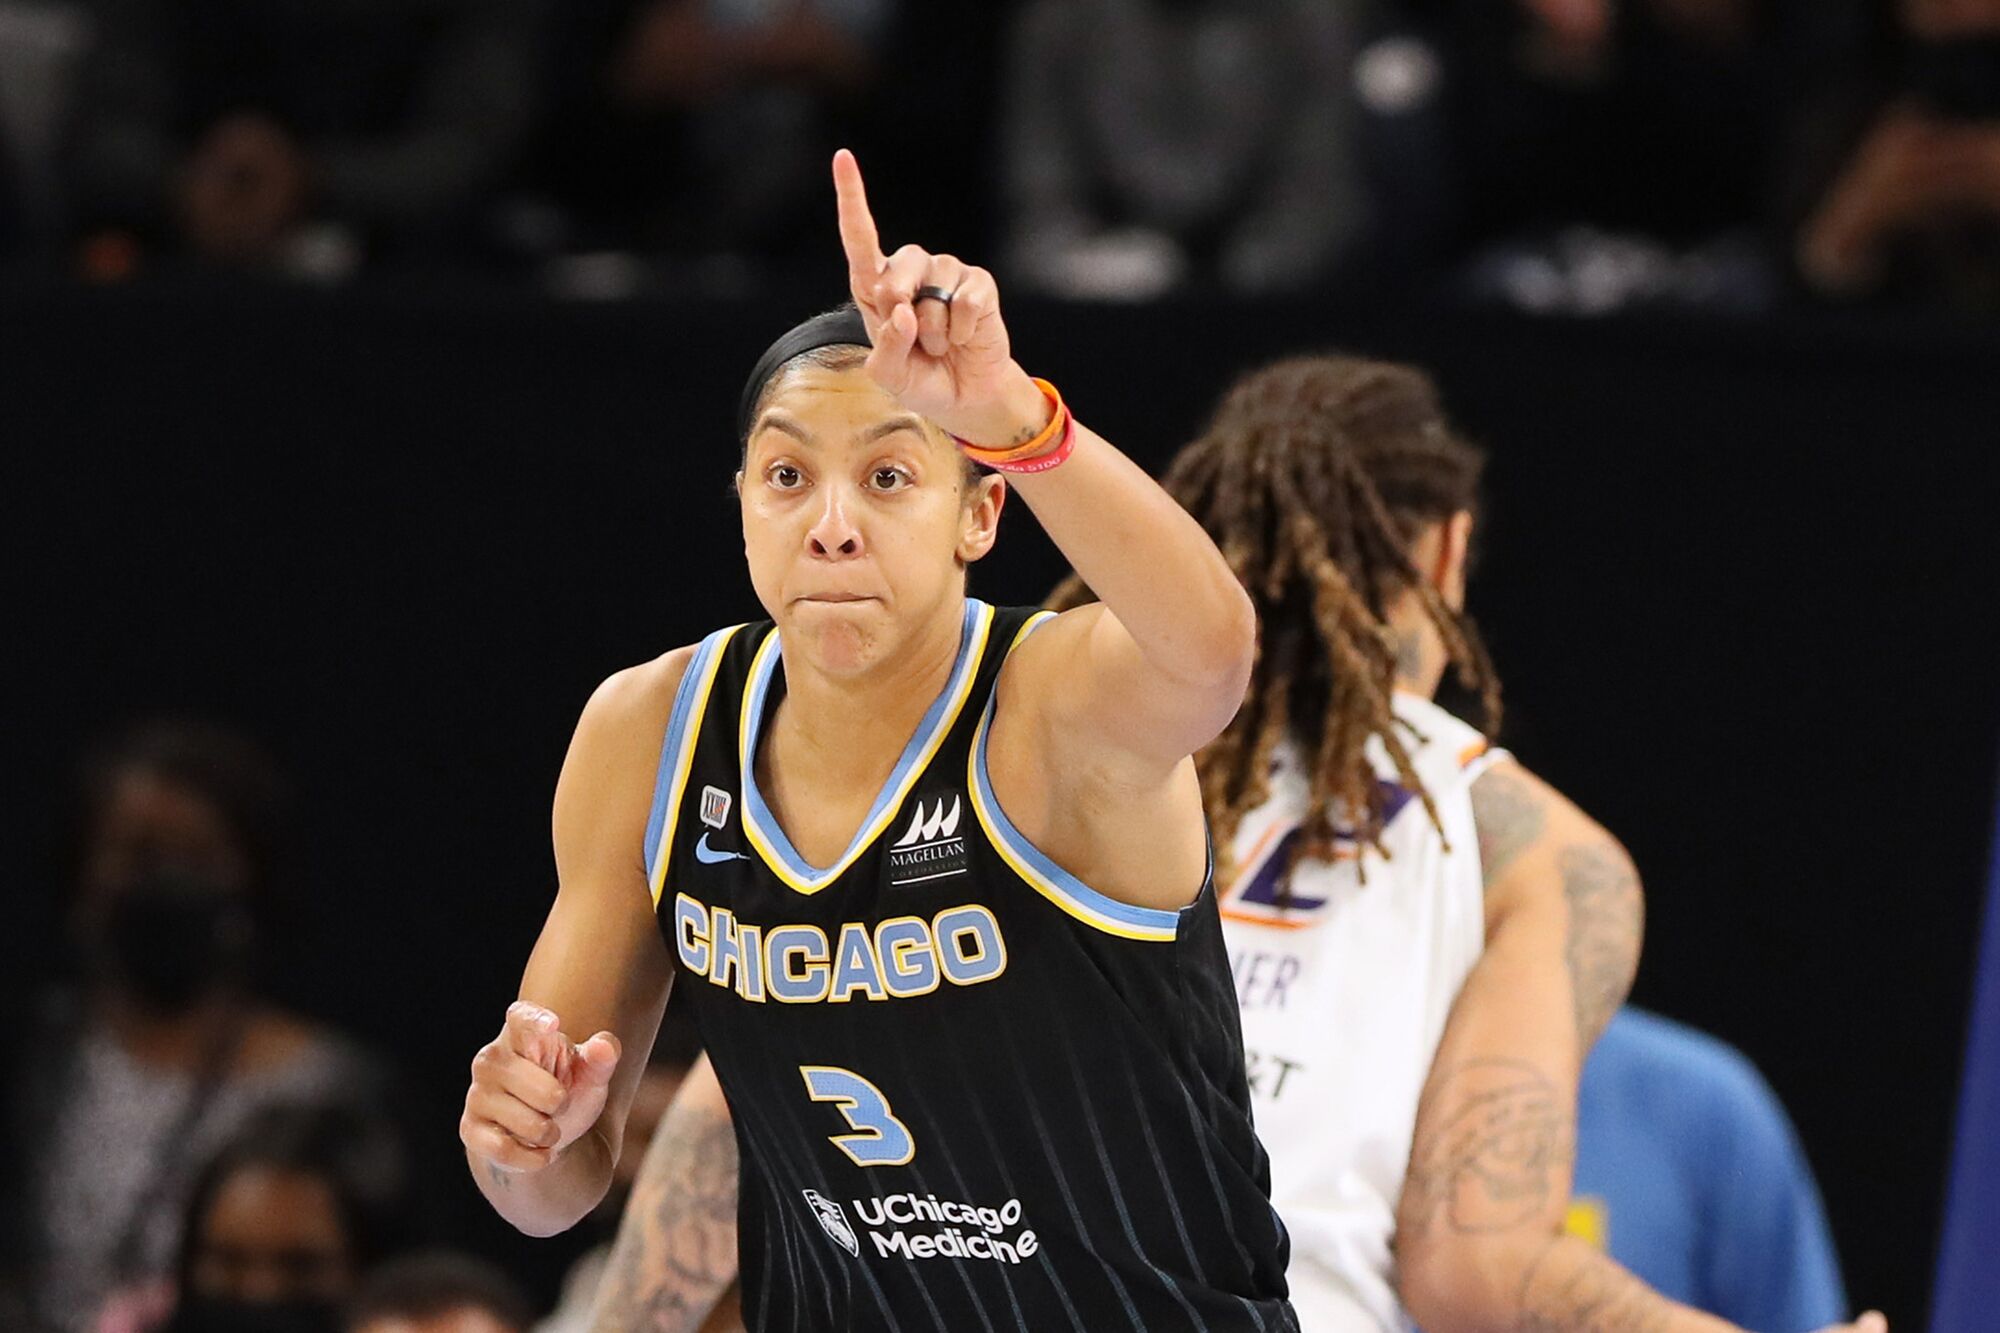 Candace Parker holds up one finger and reacts after scoring during Game 3 of the WNBA Finals